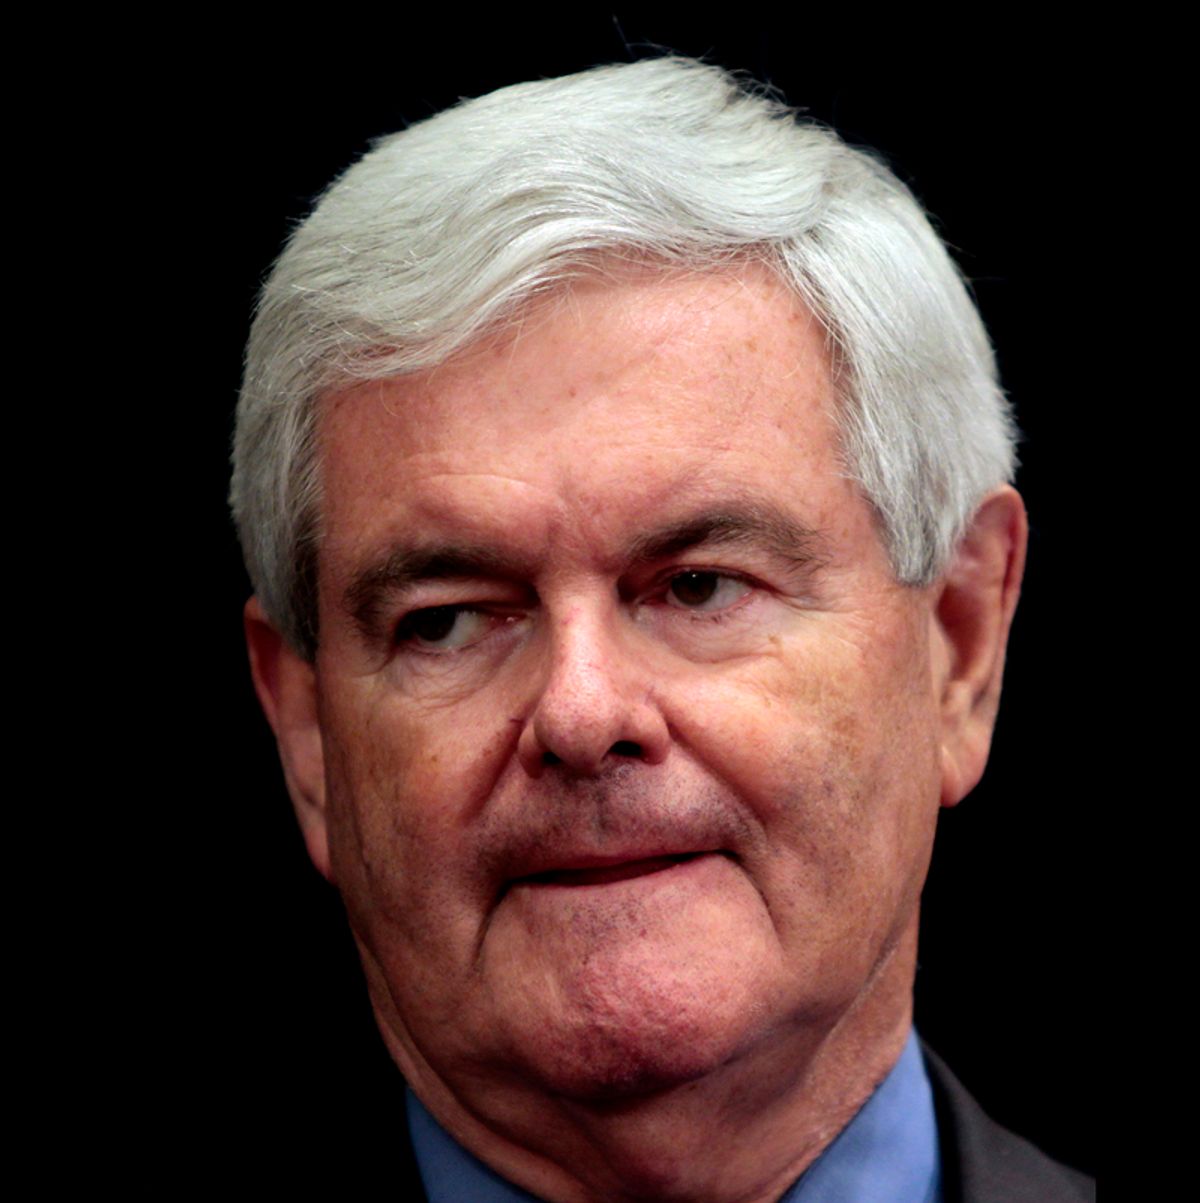 Former House Speaker Newt Gingrich, R-Ga., speaks during a news conference in the Governor's office Thursday March 3, 2011 in Atlanta.  Gingrich said he is launching a website to explore a run for president.(AP Photo/John Bazemore) (John Bazemore)